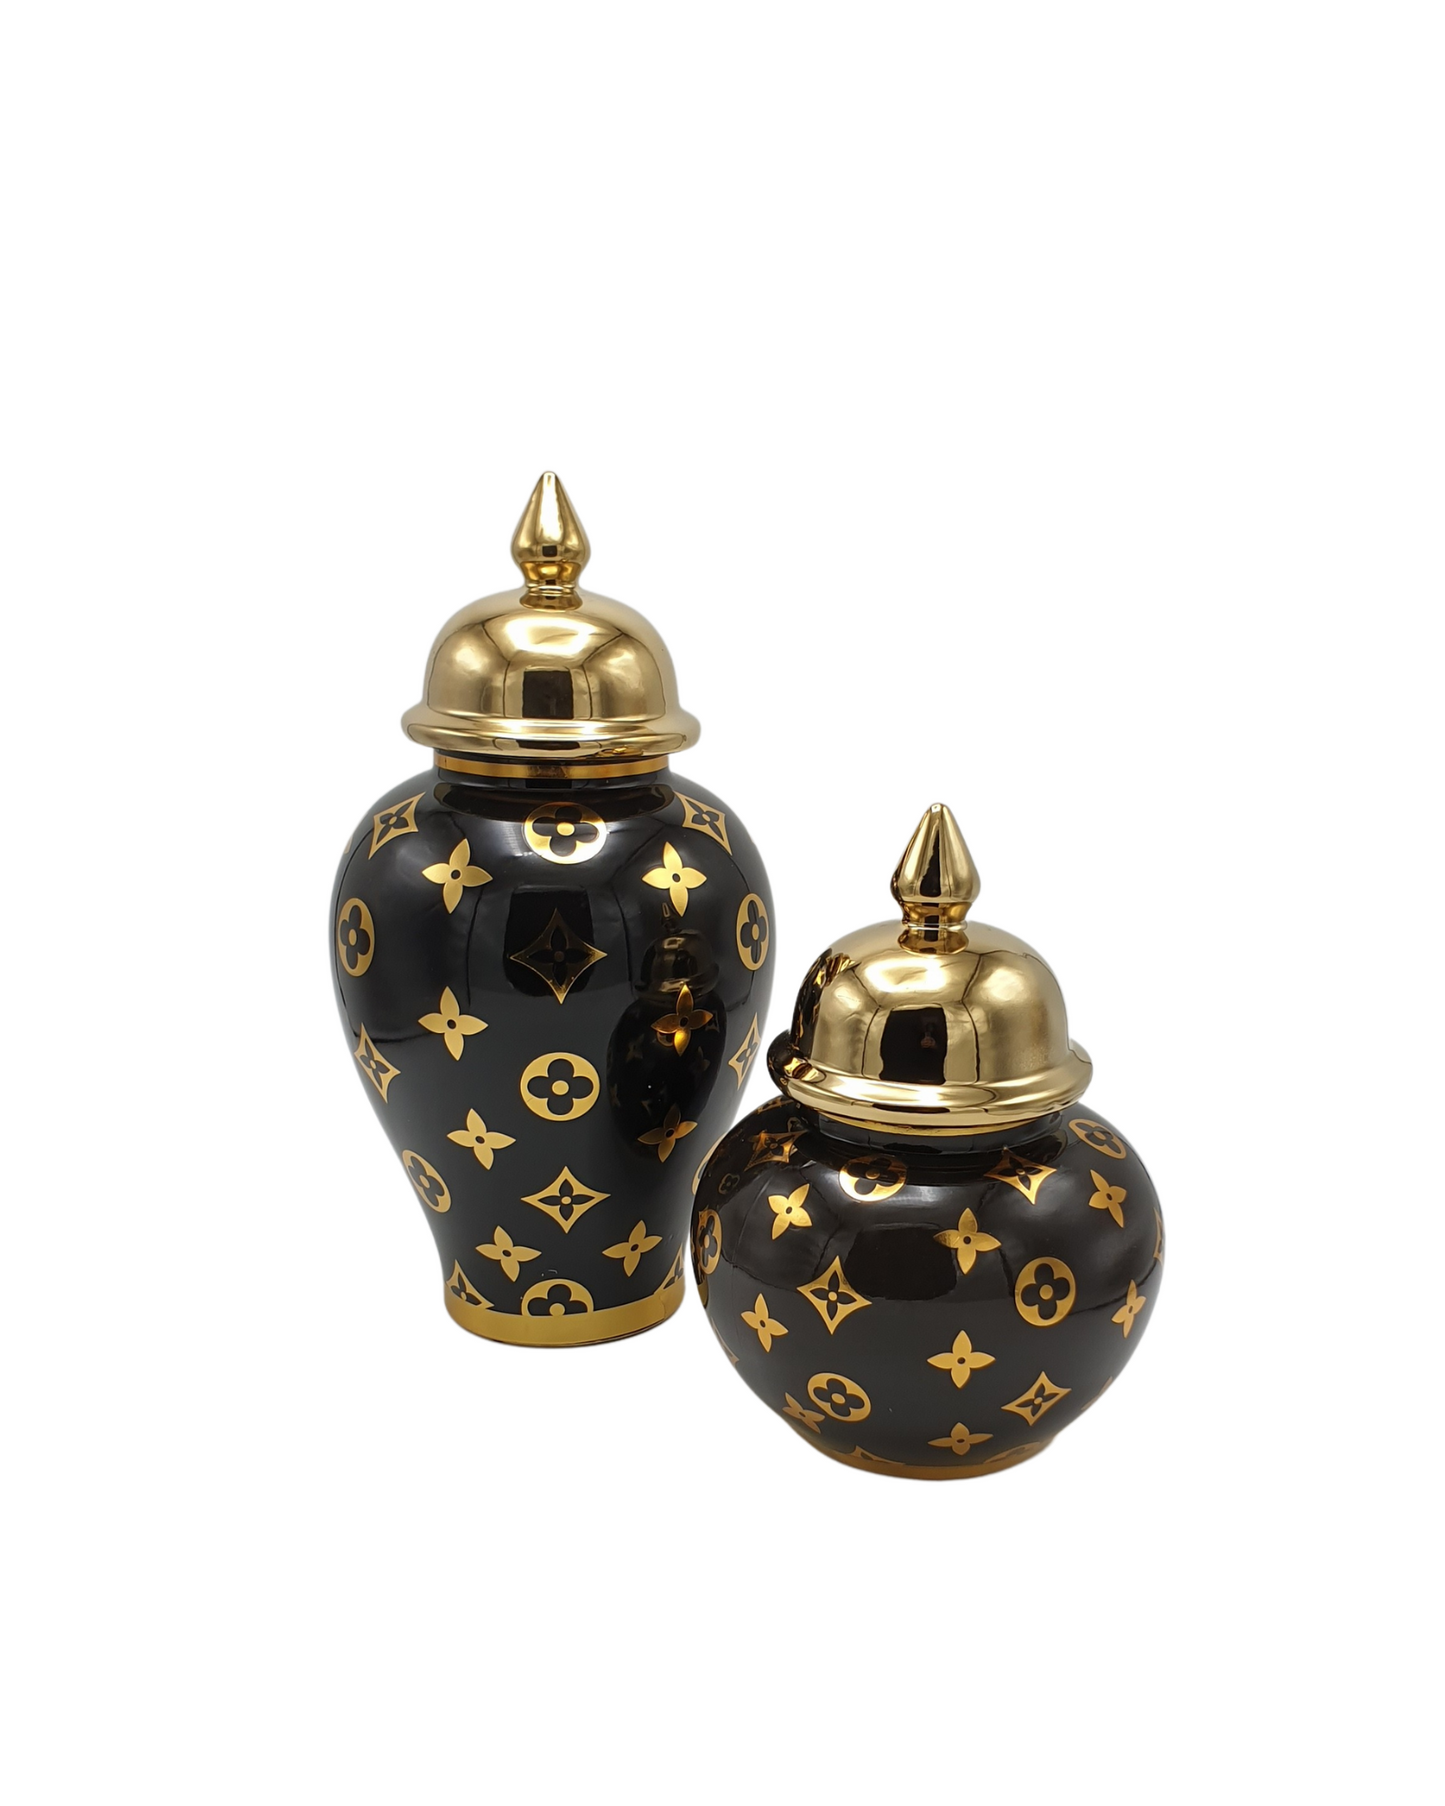 Black & Golden Urn - Available in 2 Sizes